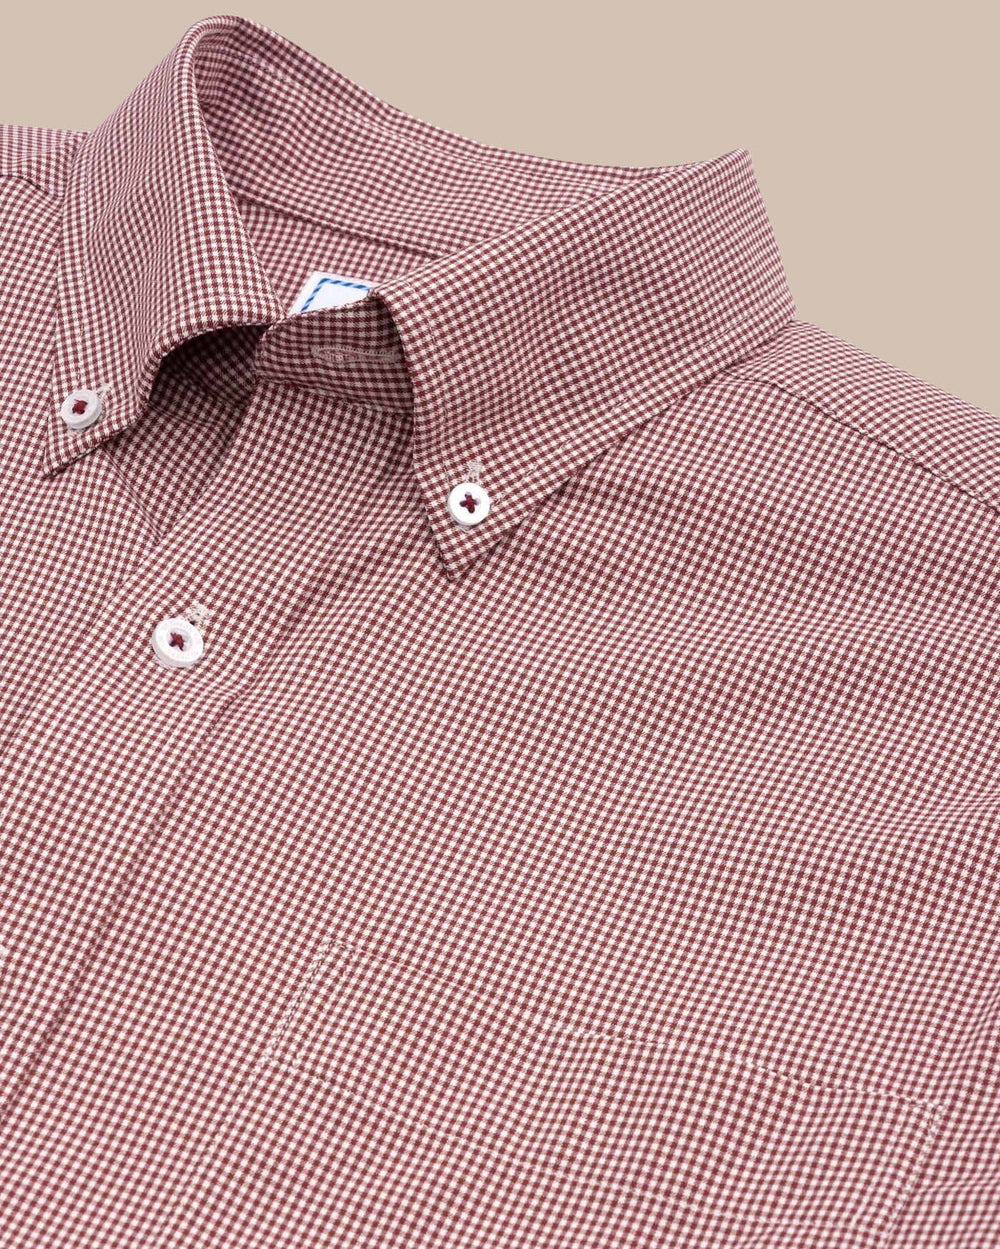 The detail view of the Southern Tide Team Colors Gingham Intercoastal Sport Shirt by Southern Tide - Chianti